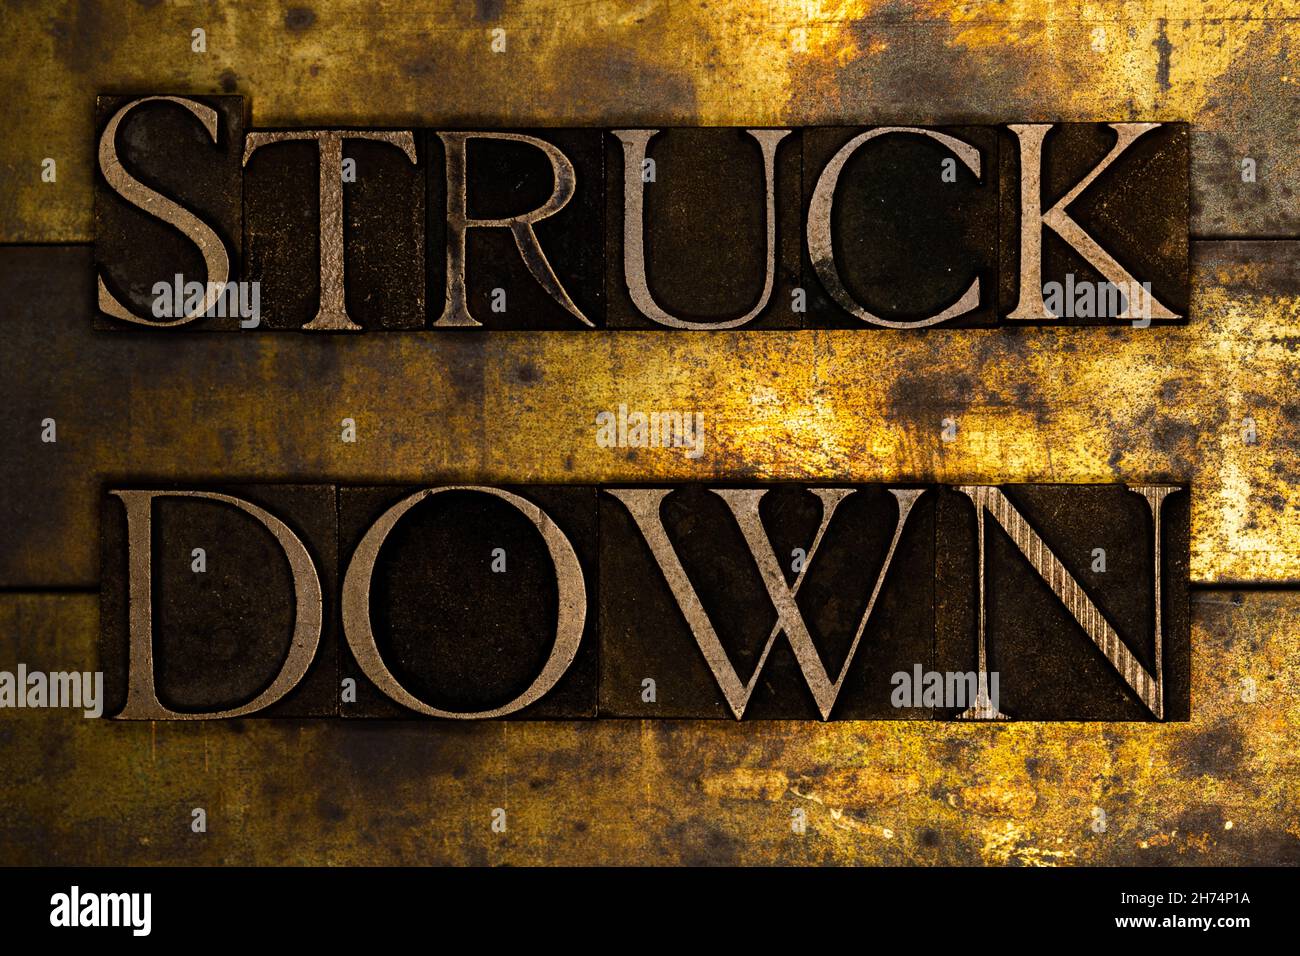 Struck Down text message on textured grunge copper and vintage gold background Stock Photo